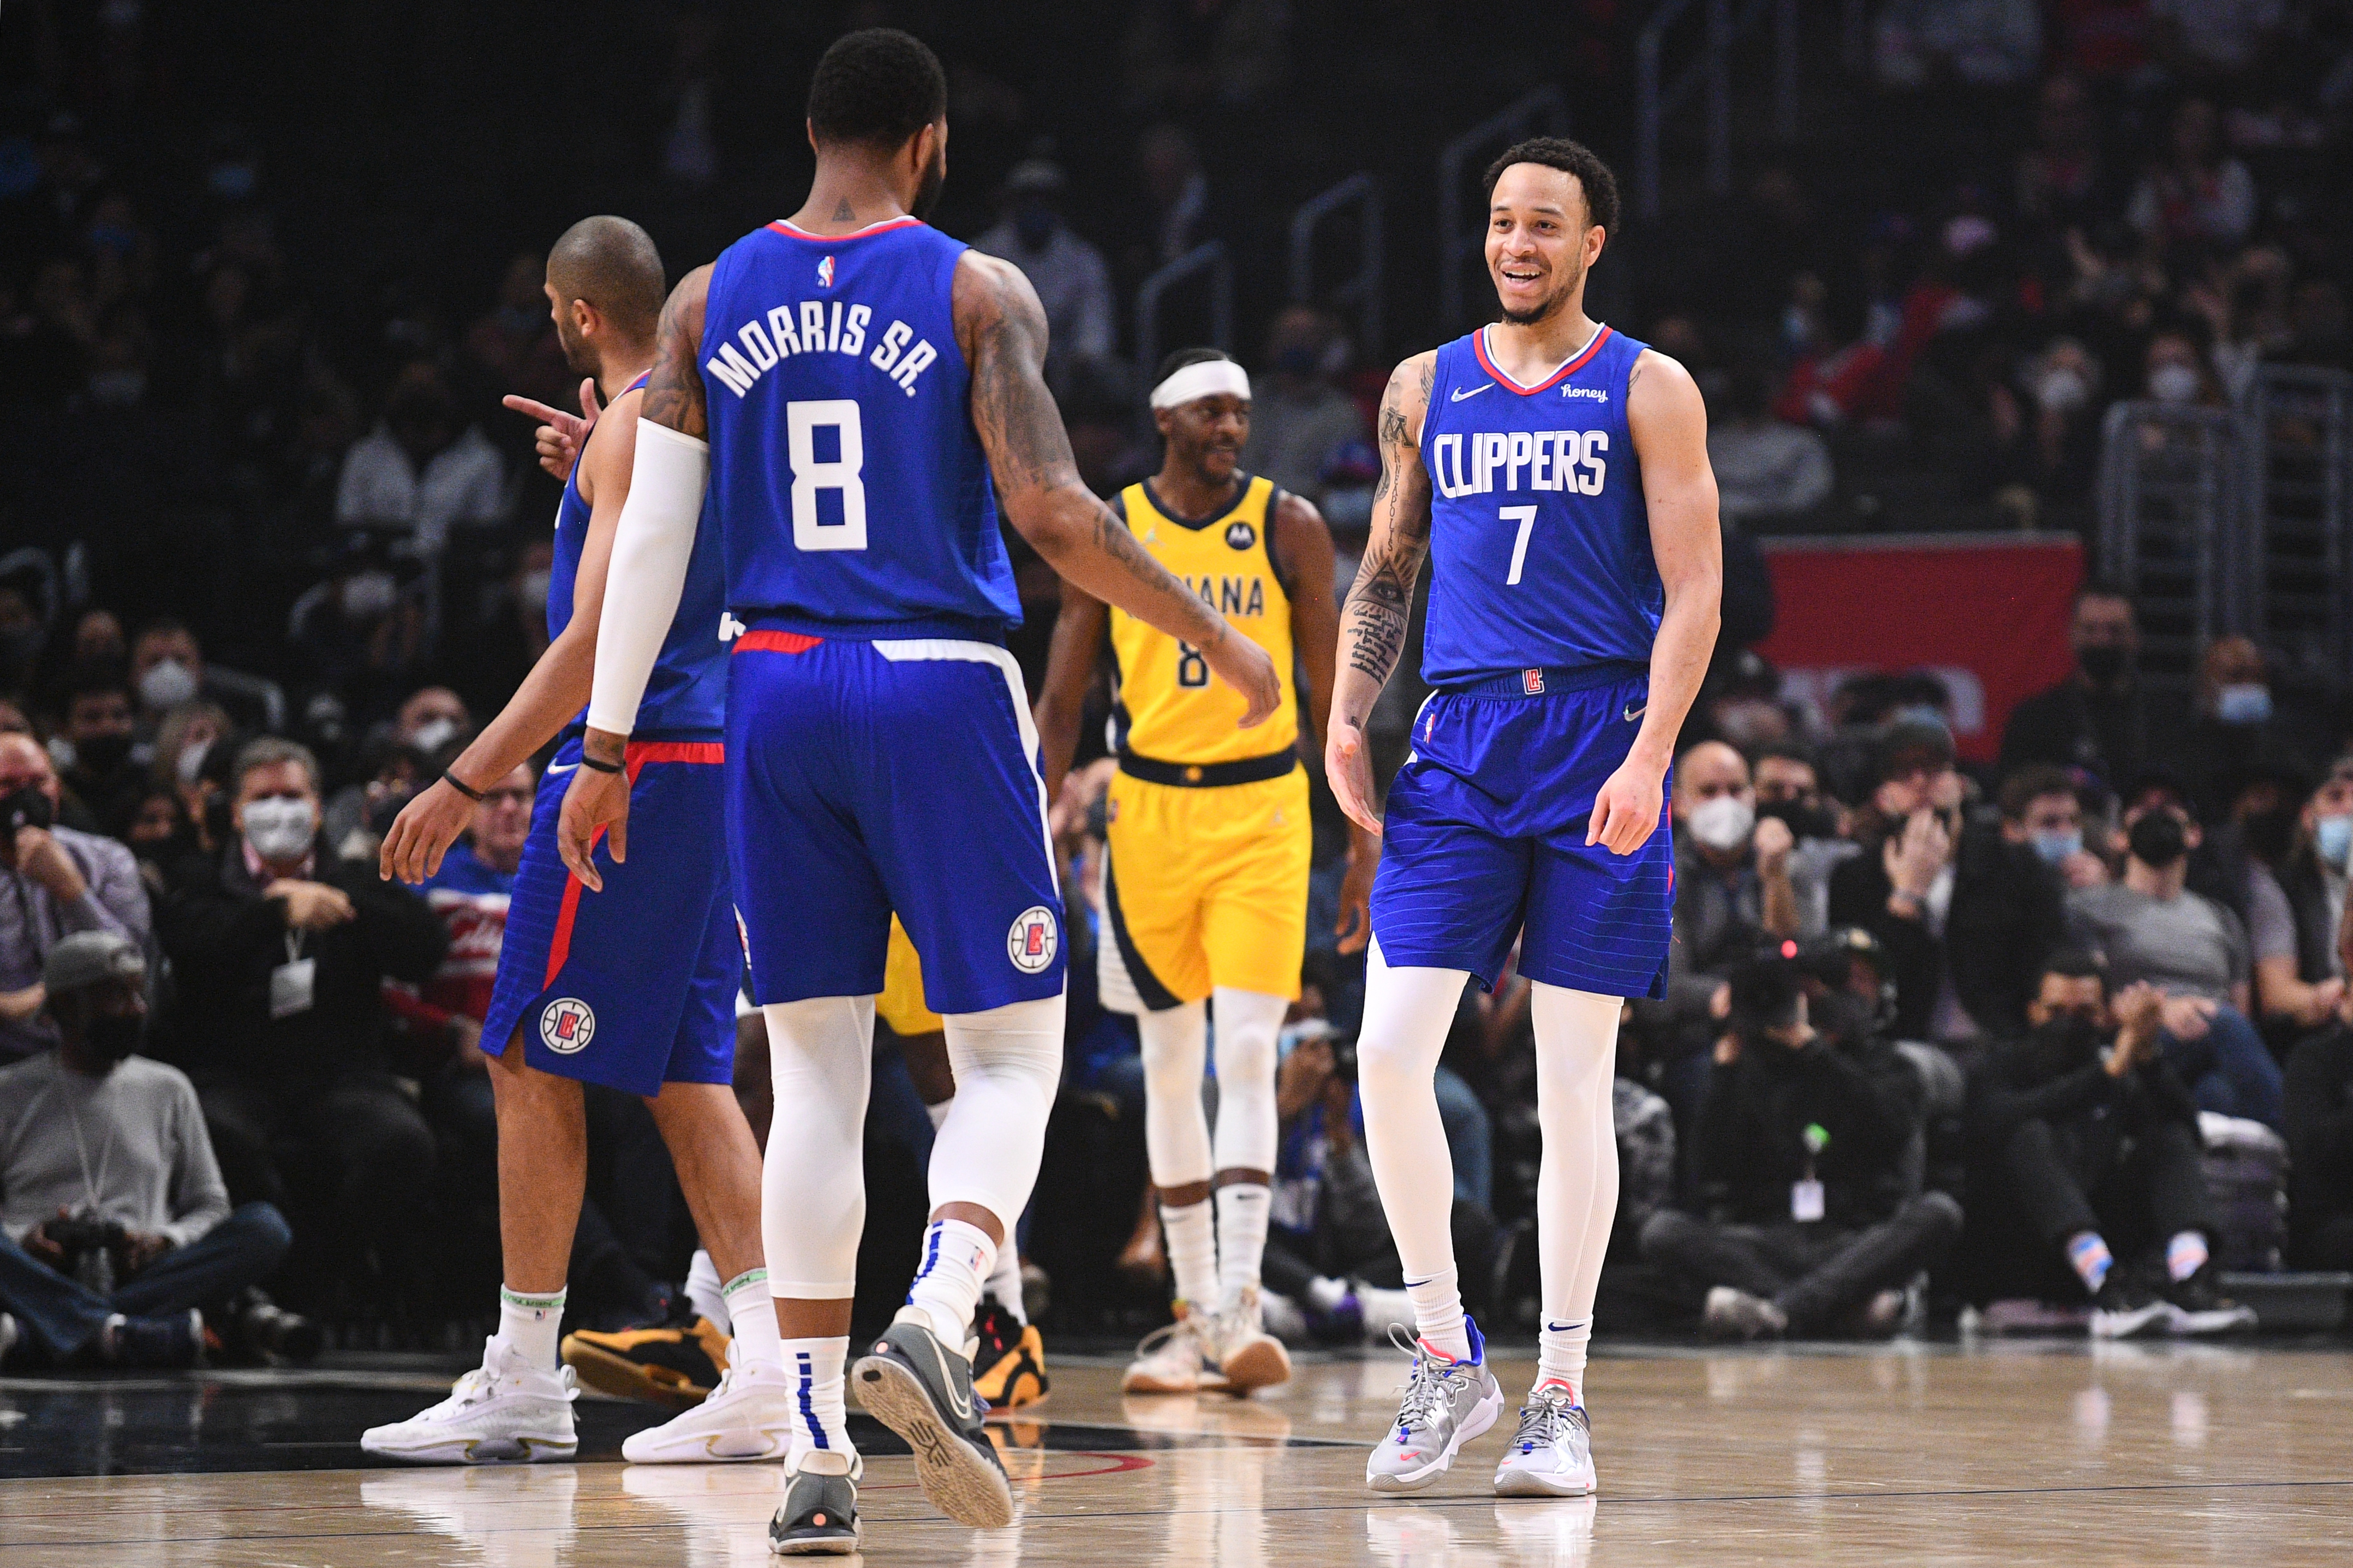 NBA: JAN 17 Pacers at Clippers